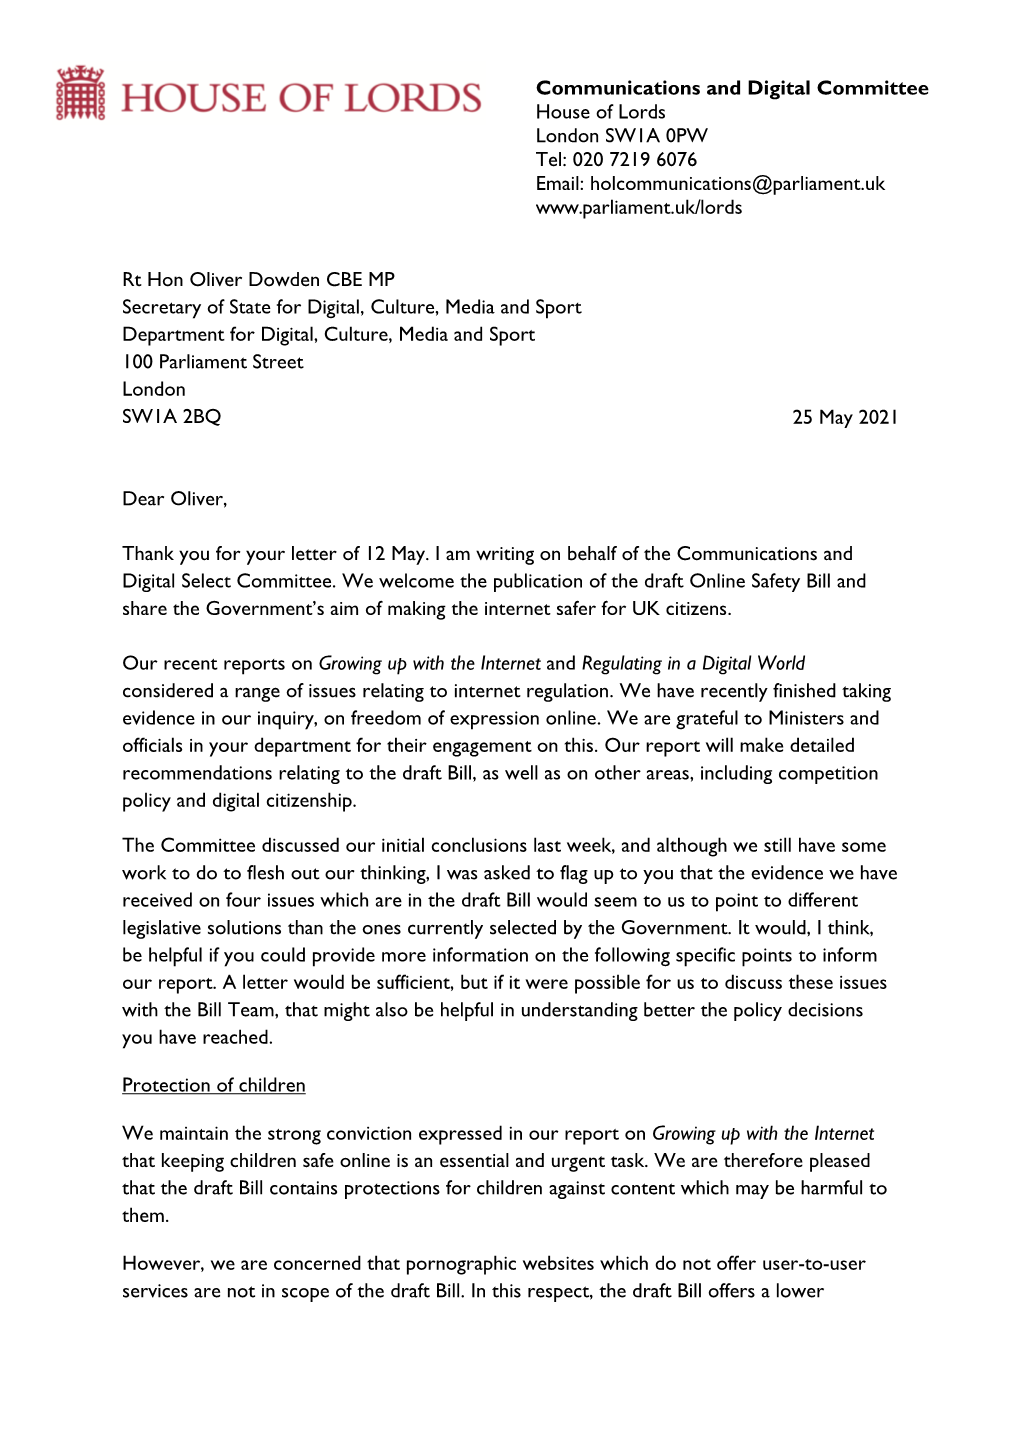 Letter to Rt Hon Oliver Dowden MP